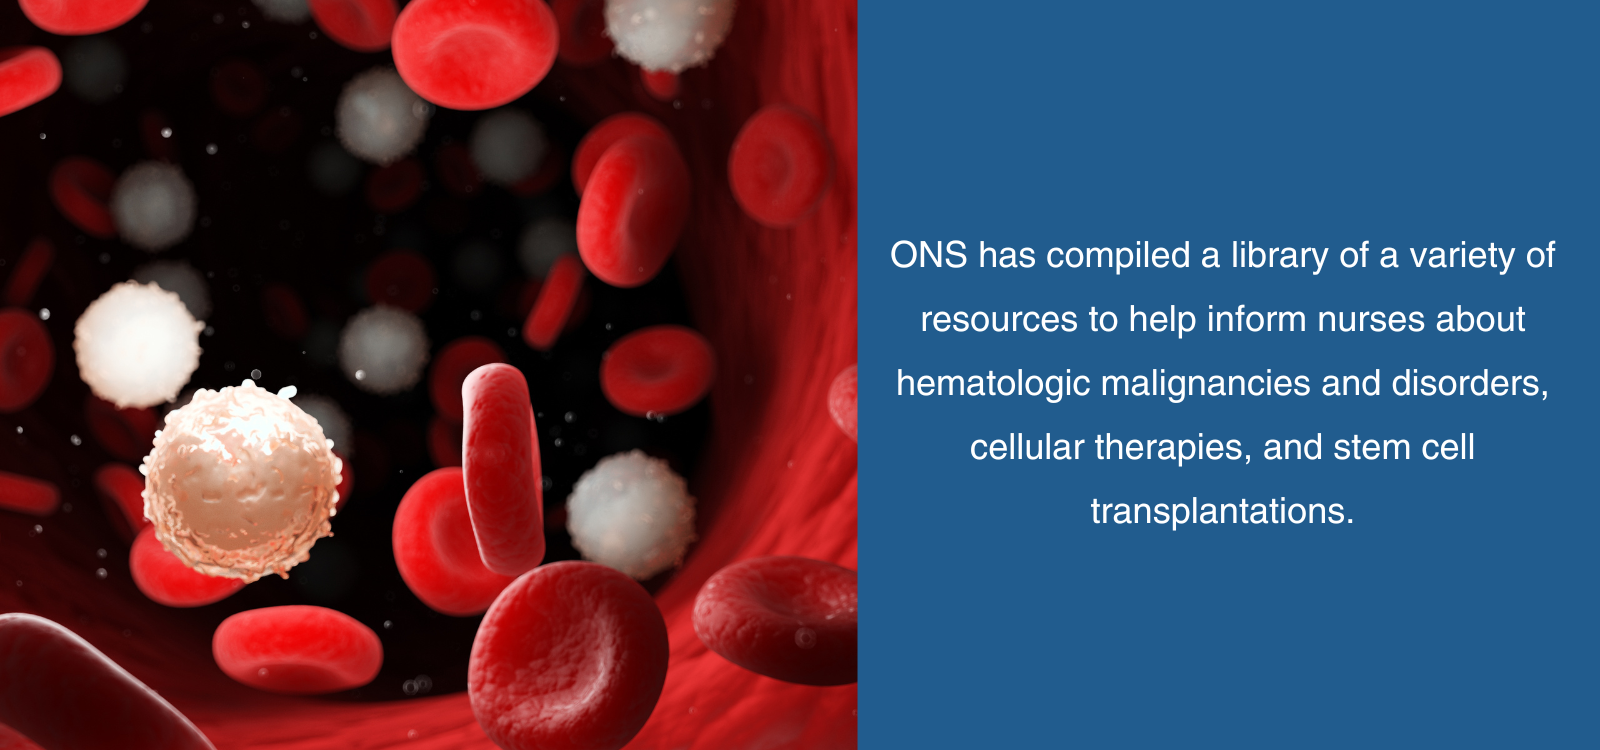 Animated image of red and white blood cells with blue box on the right side. The box says "ONS has compiled a library of a variety of resources to help inform nurses about hematologic malignancies and disorders, cellular therapies, and stem cell transplantations."